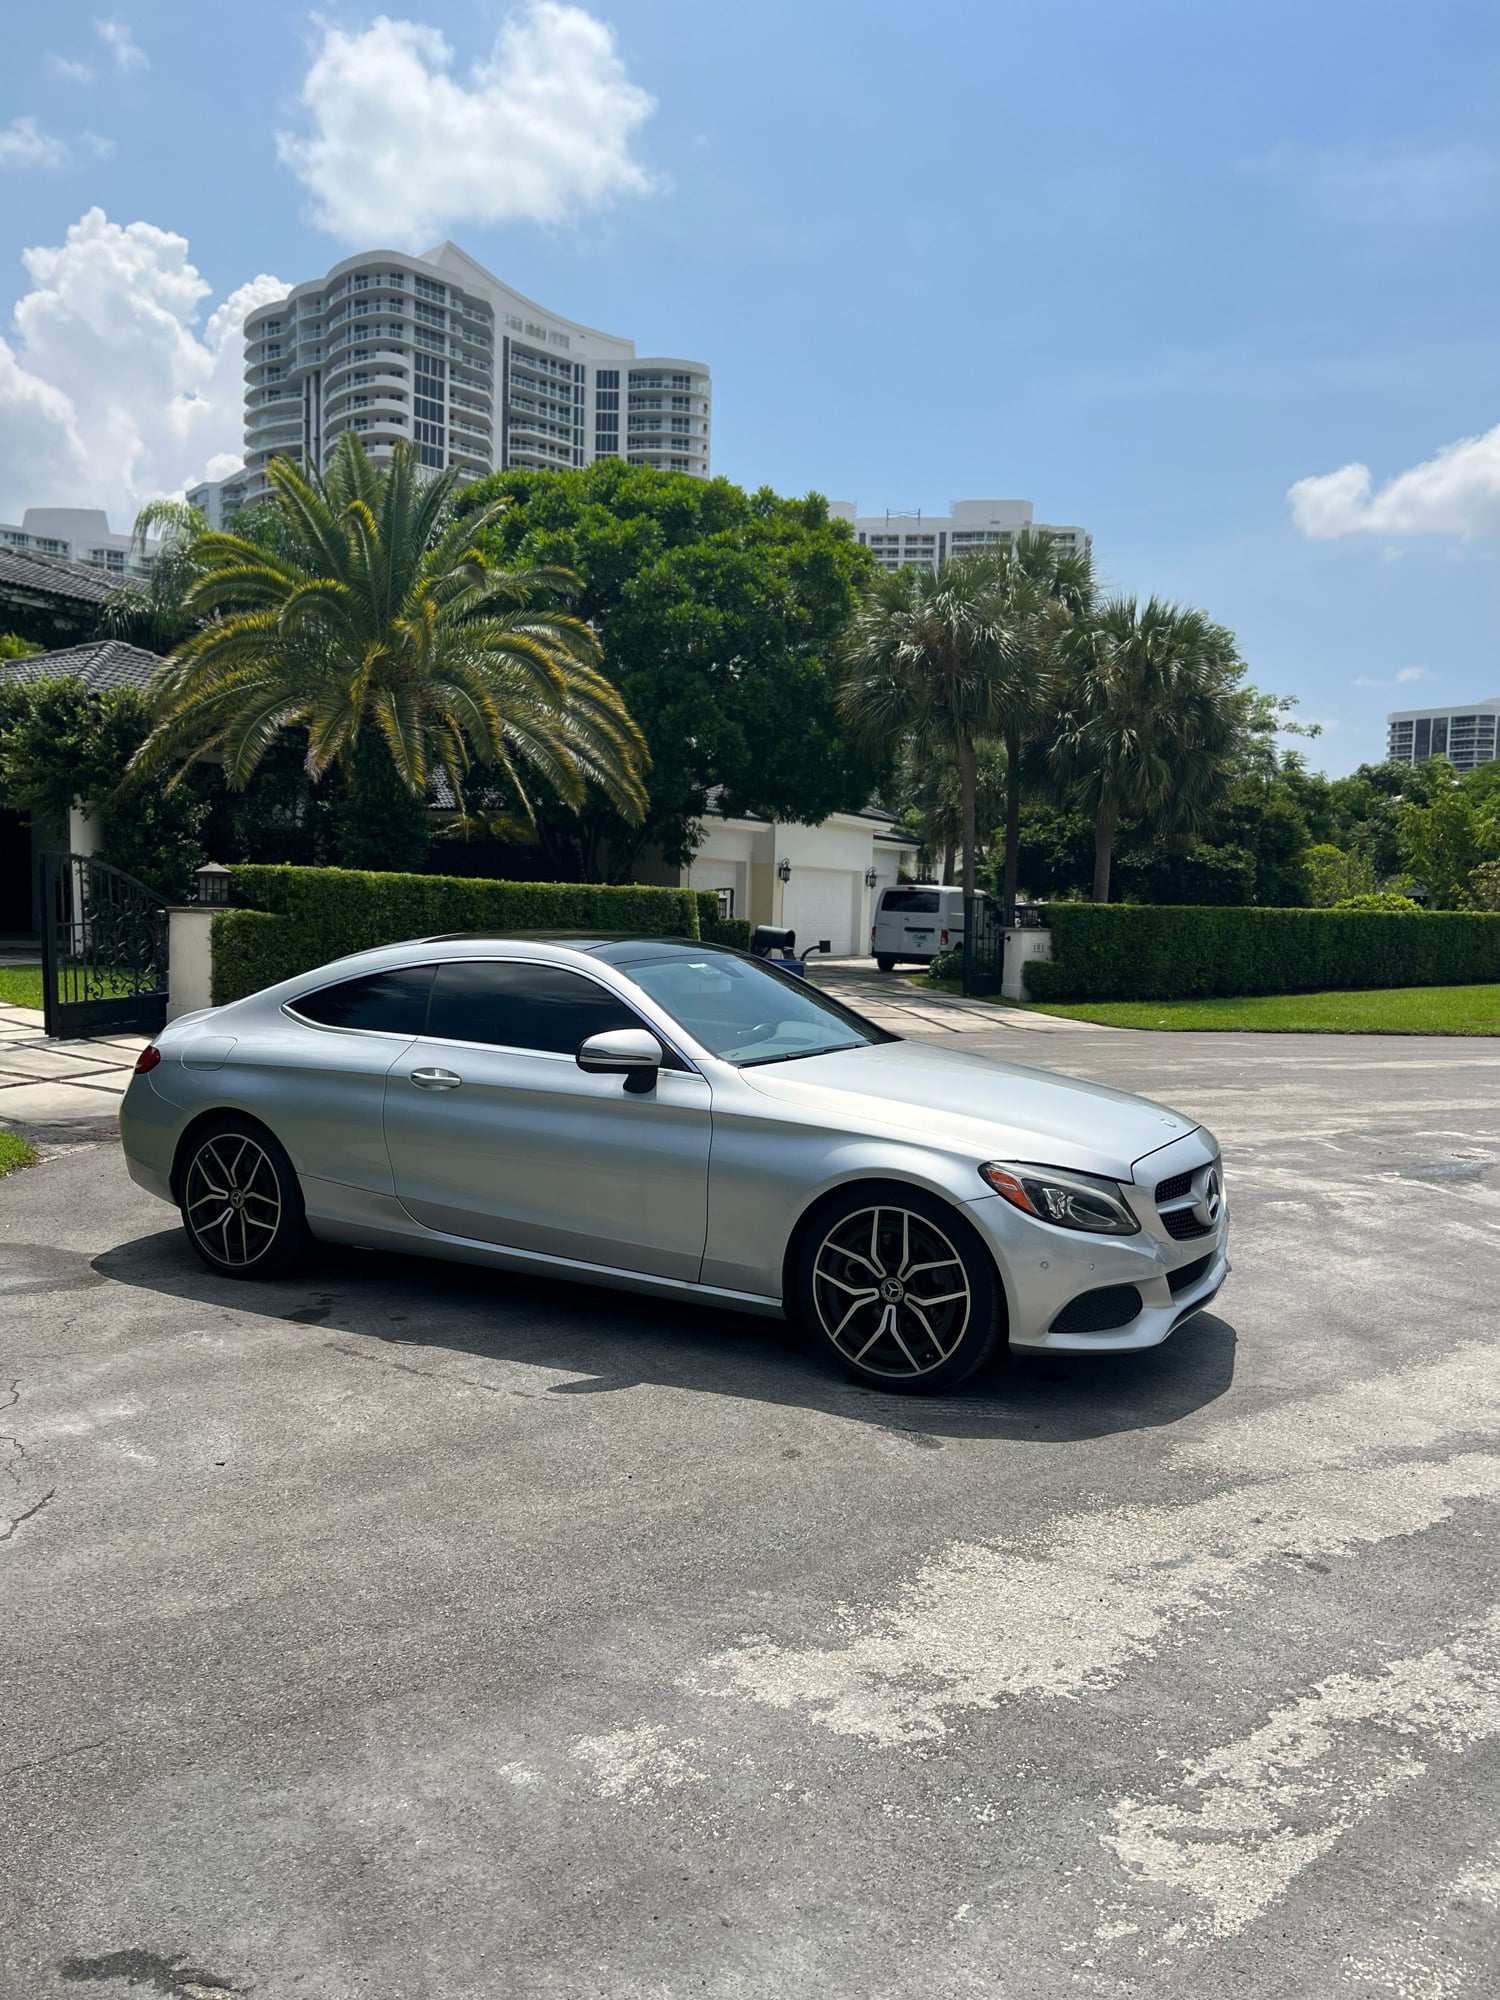 2017 Mercedes-Benz C300 - 2017 C300 Coupe 4Matic In SoFLo - Used - VIN WDDWJ4KB4HF36444 - 40,586 Miles - 4 cyl - AWD - Automatic - Coupe - Silver - Hallandale Beach, FL 33009, United States